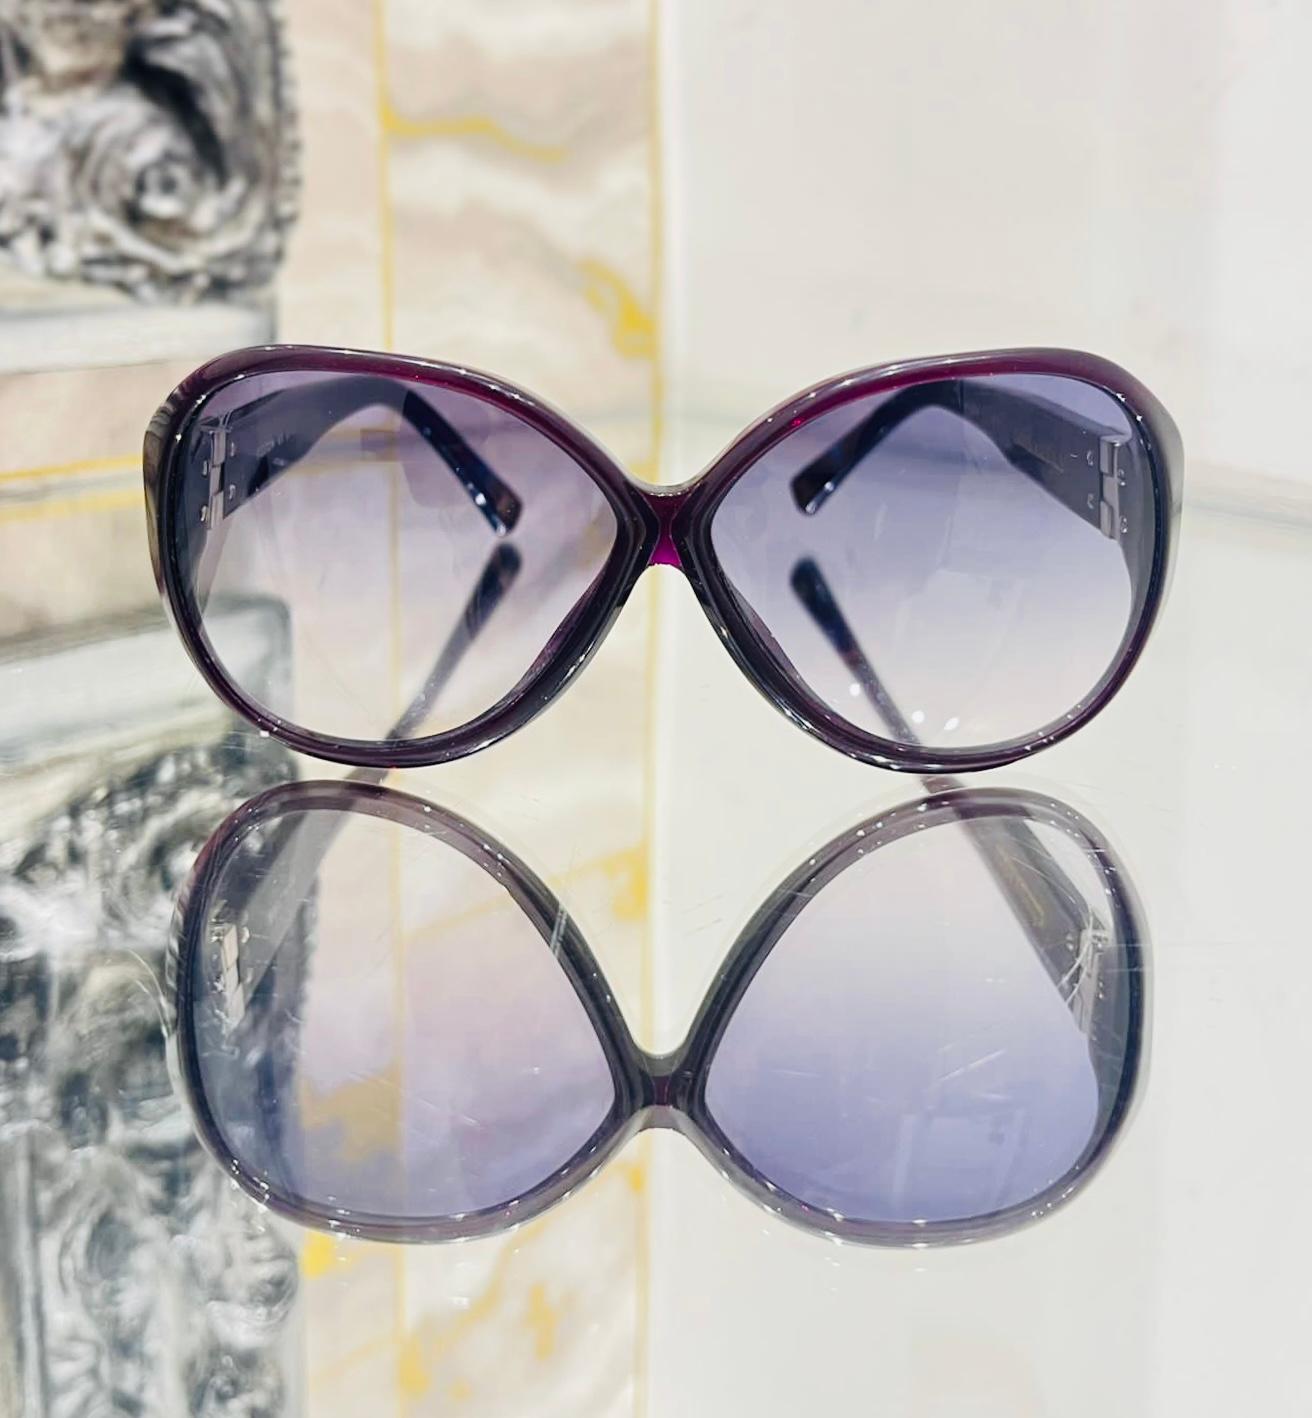 Louis Vuitton Oversized Sunglasses

Purple framed sunglasses featuring rounded rims and blue gradient lenses.

Styled with glitter detailed arms with silver inlay of LV monogram symbols.

Size – One Size

Condition – Very Good

Composition –